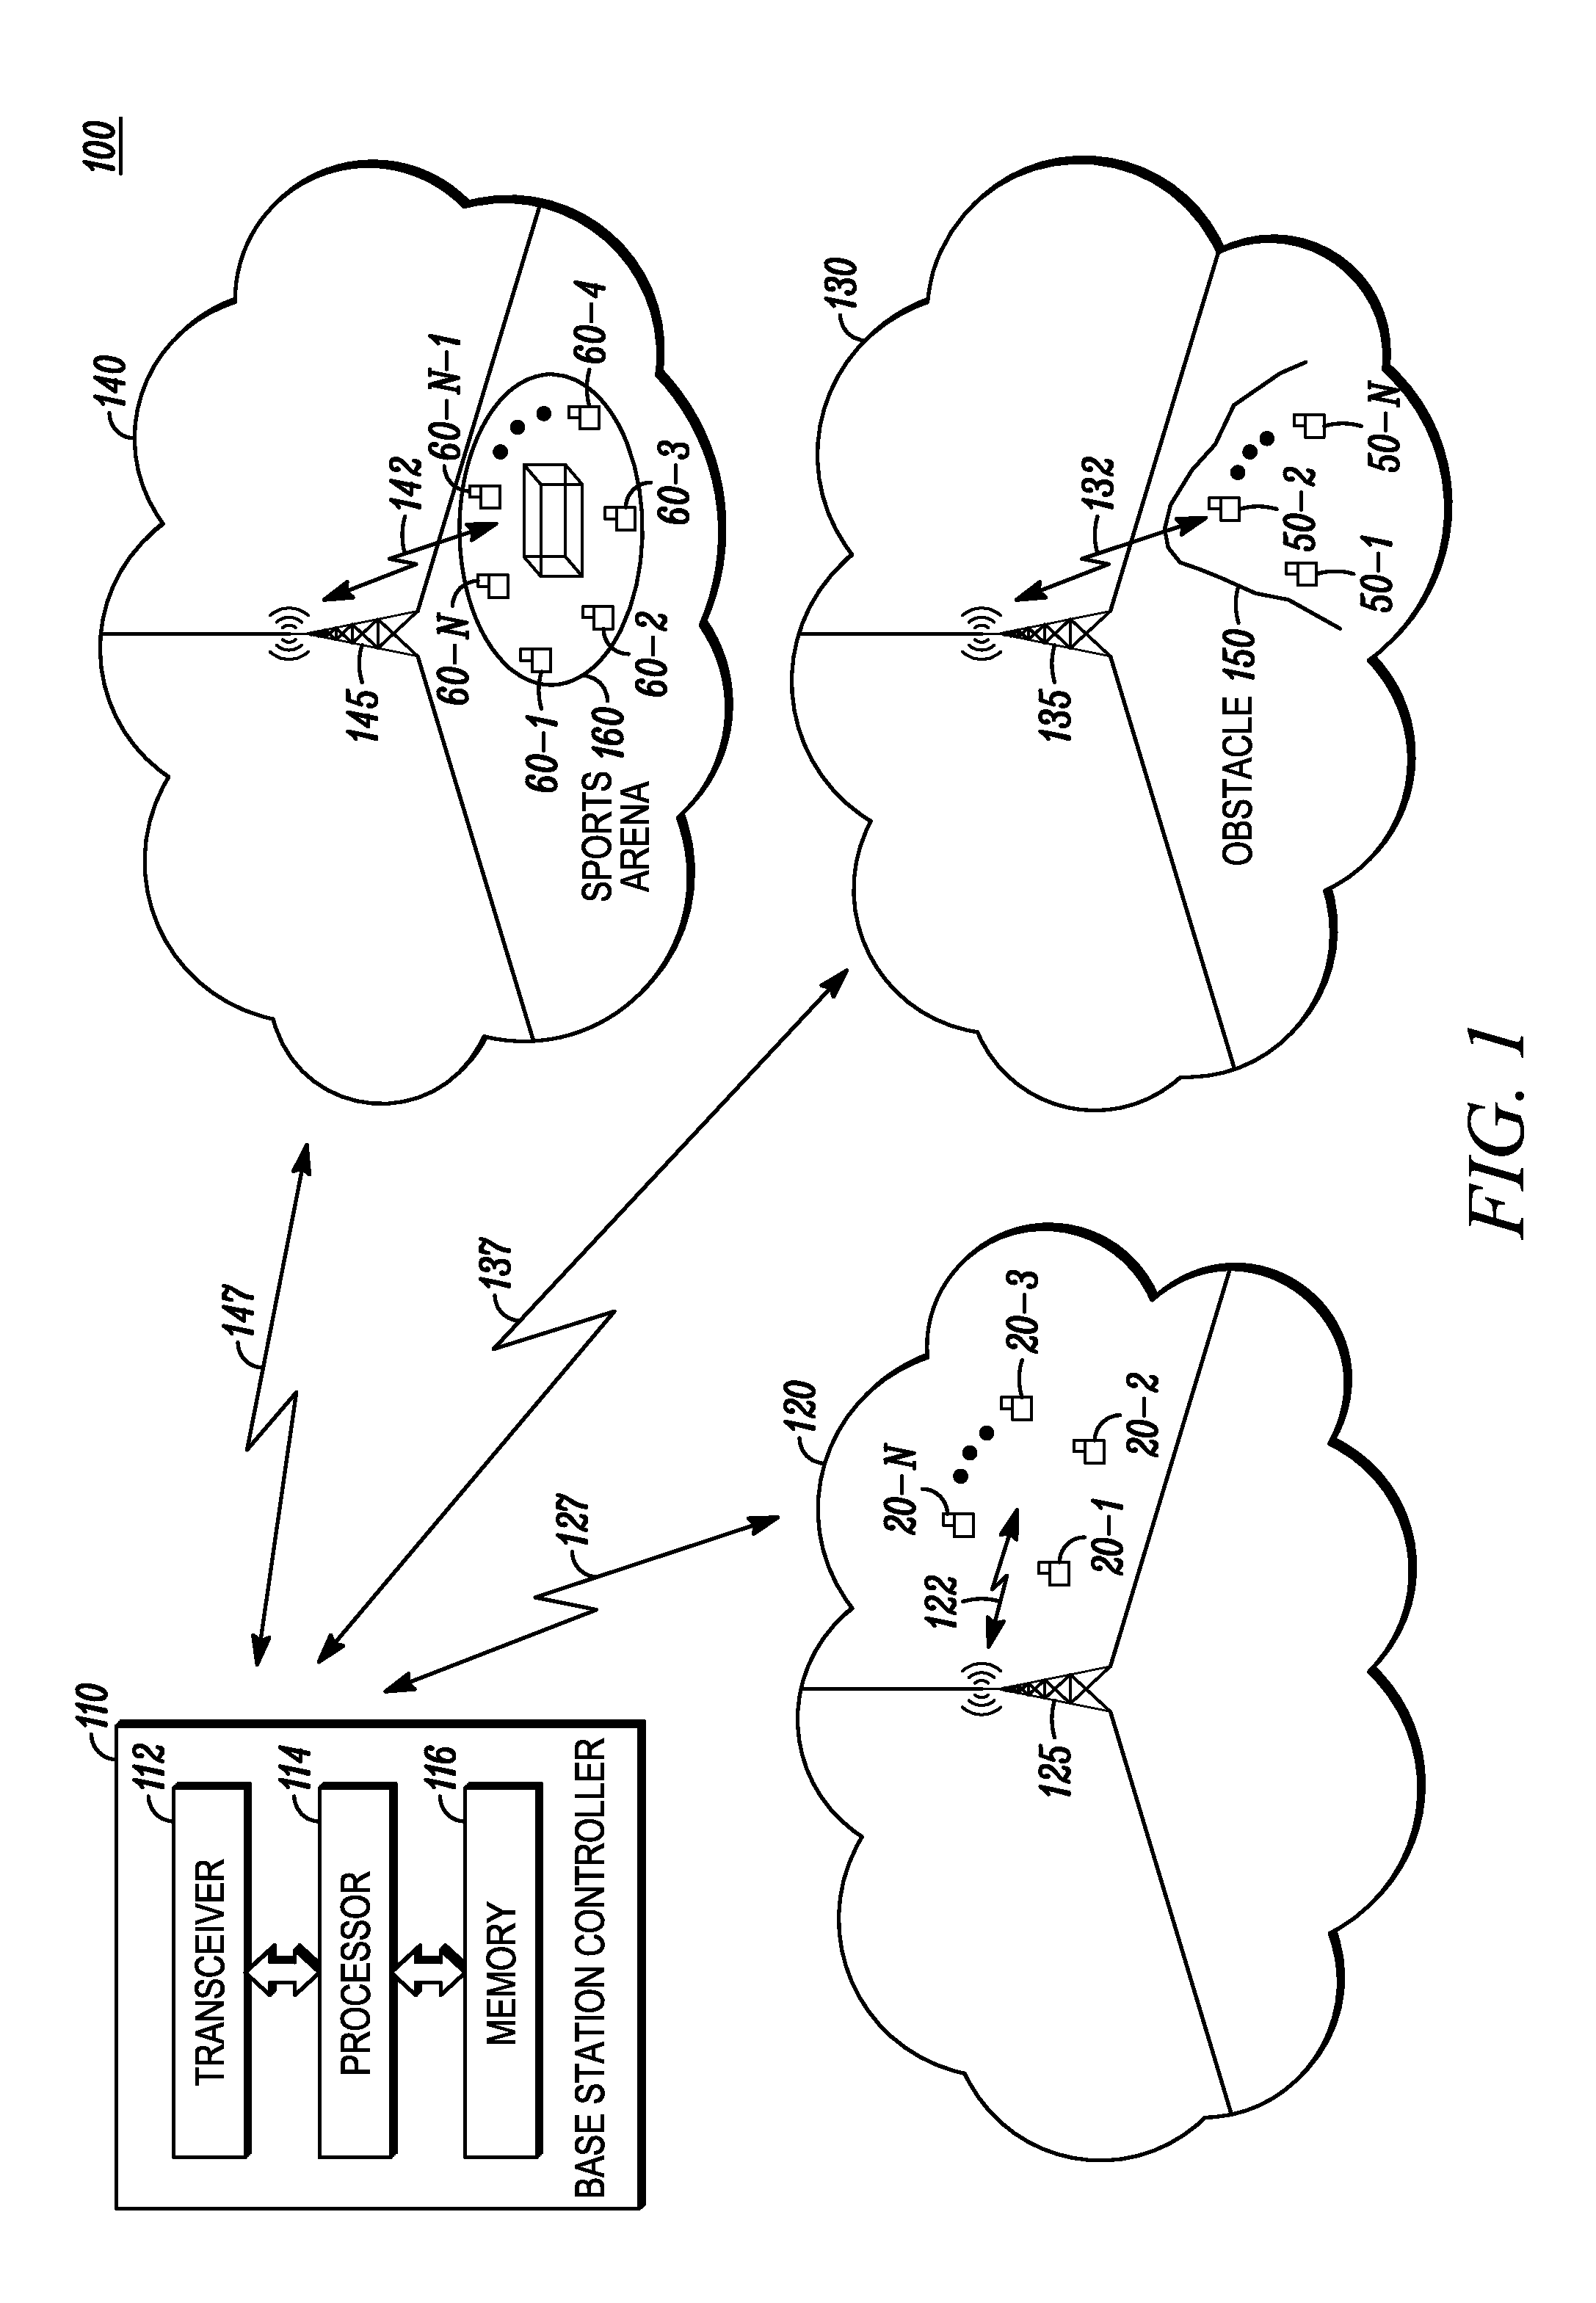 Method and apparatus for dynamically changing a maximum access channel rate